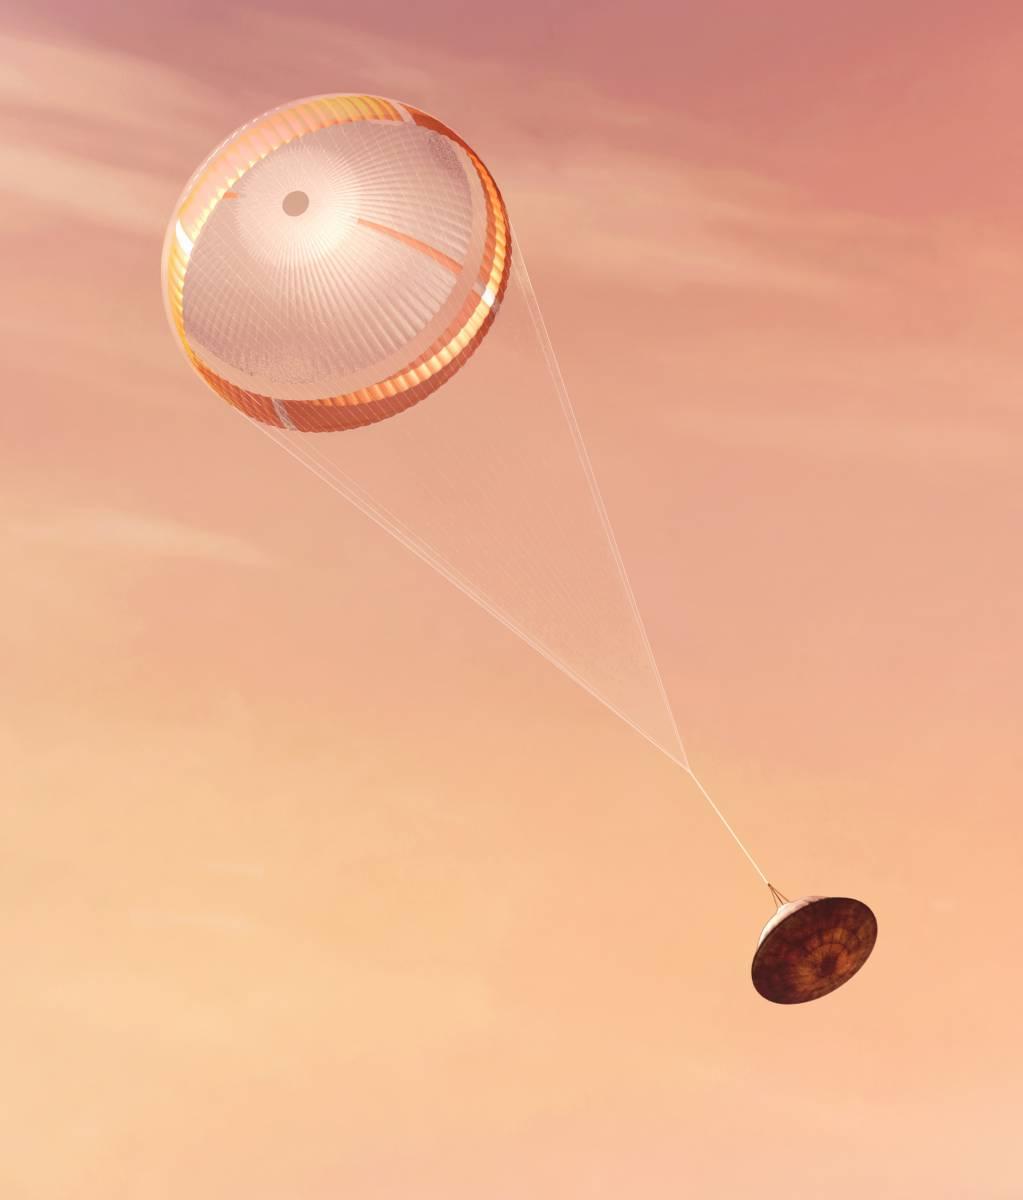 NASA’s Perseverance rover deploys a supersonic parachute from its aeroshell as it slows down before landing, in this artist’s illustration. Hundreds of critical events must execute perfectly and exactly on time for the rover to land safely on Feb. 18, 2021.